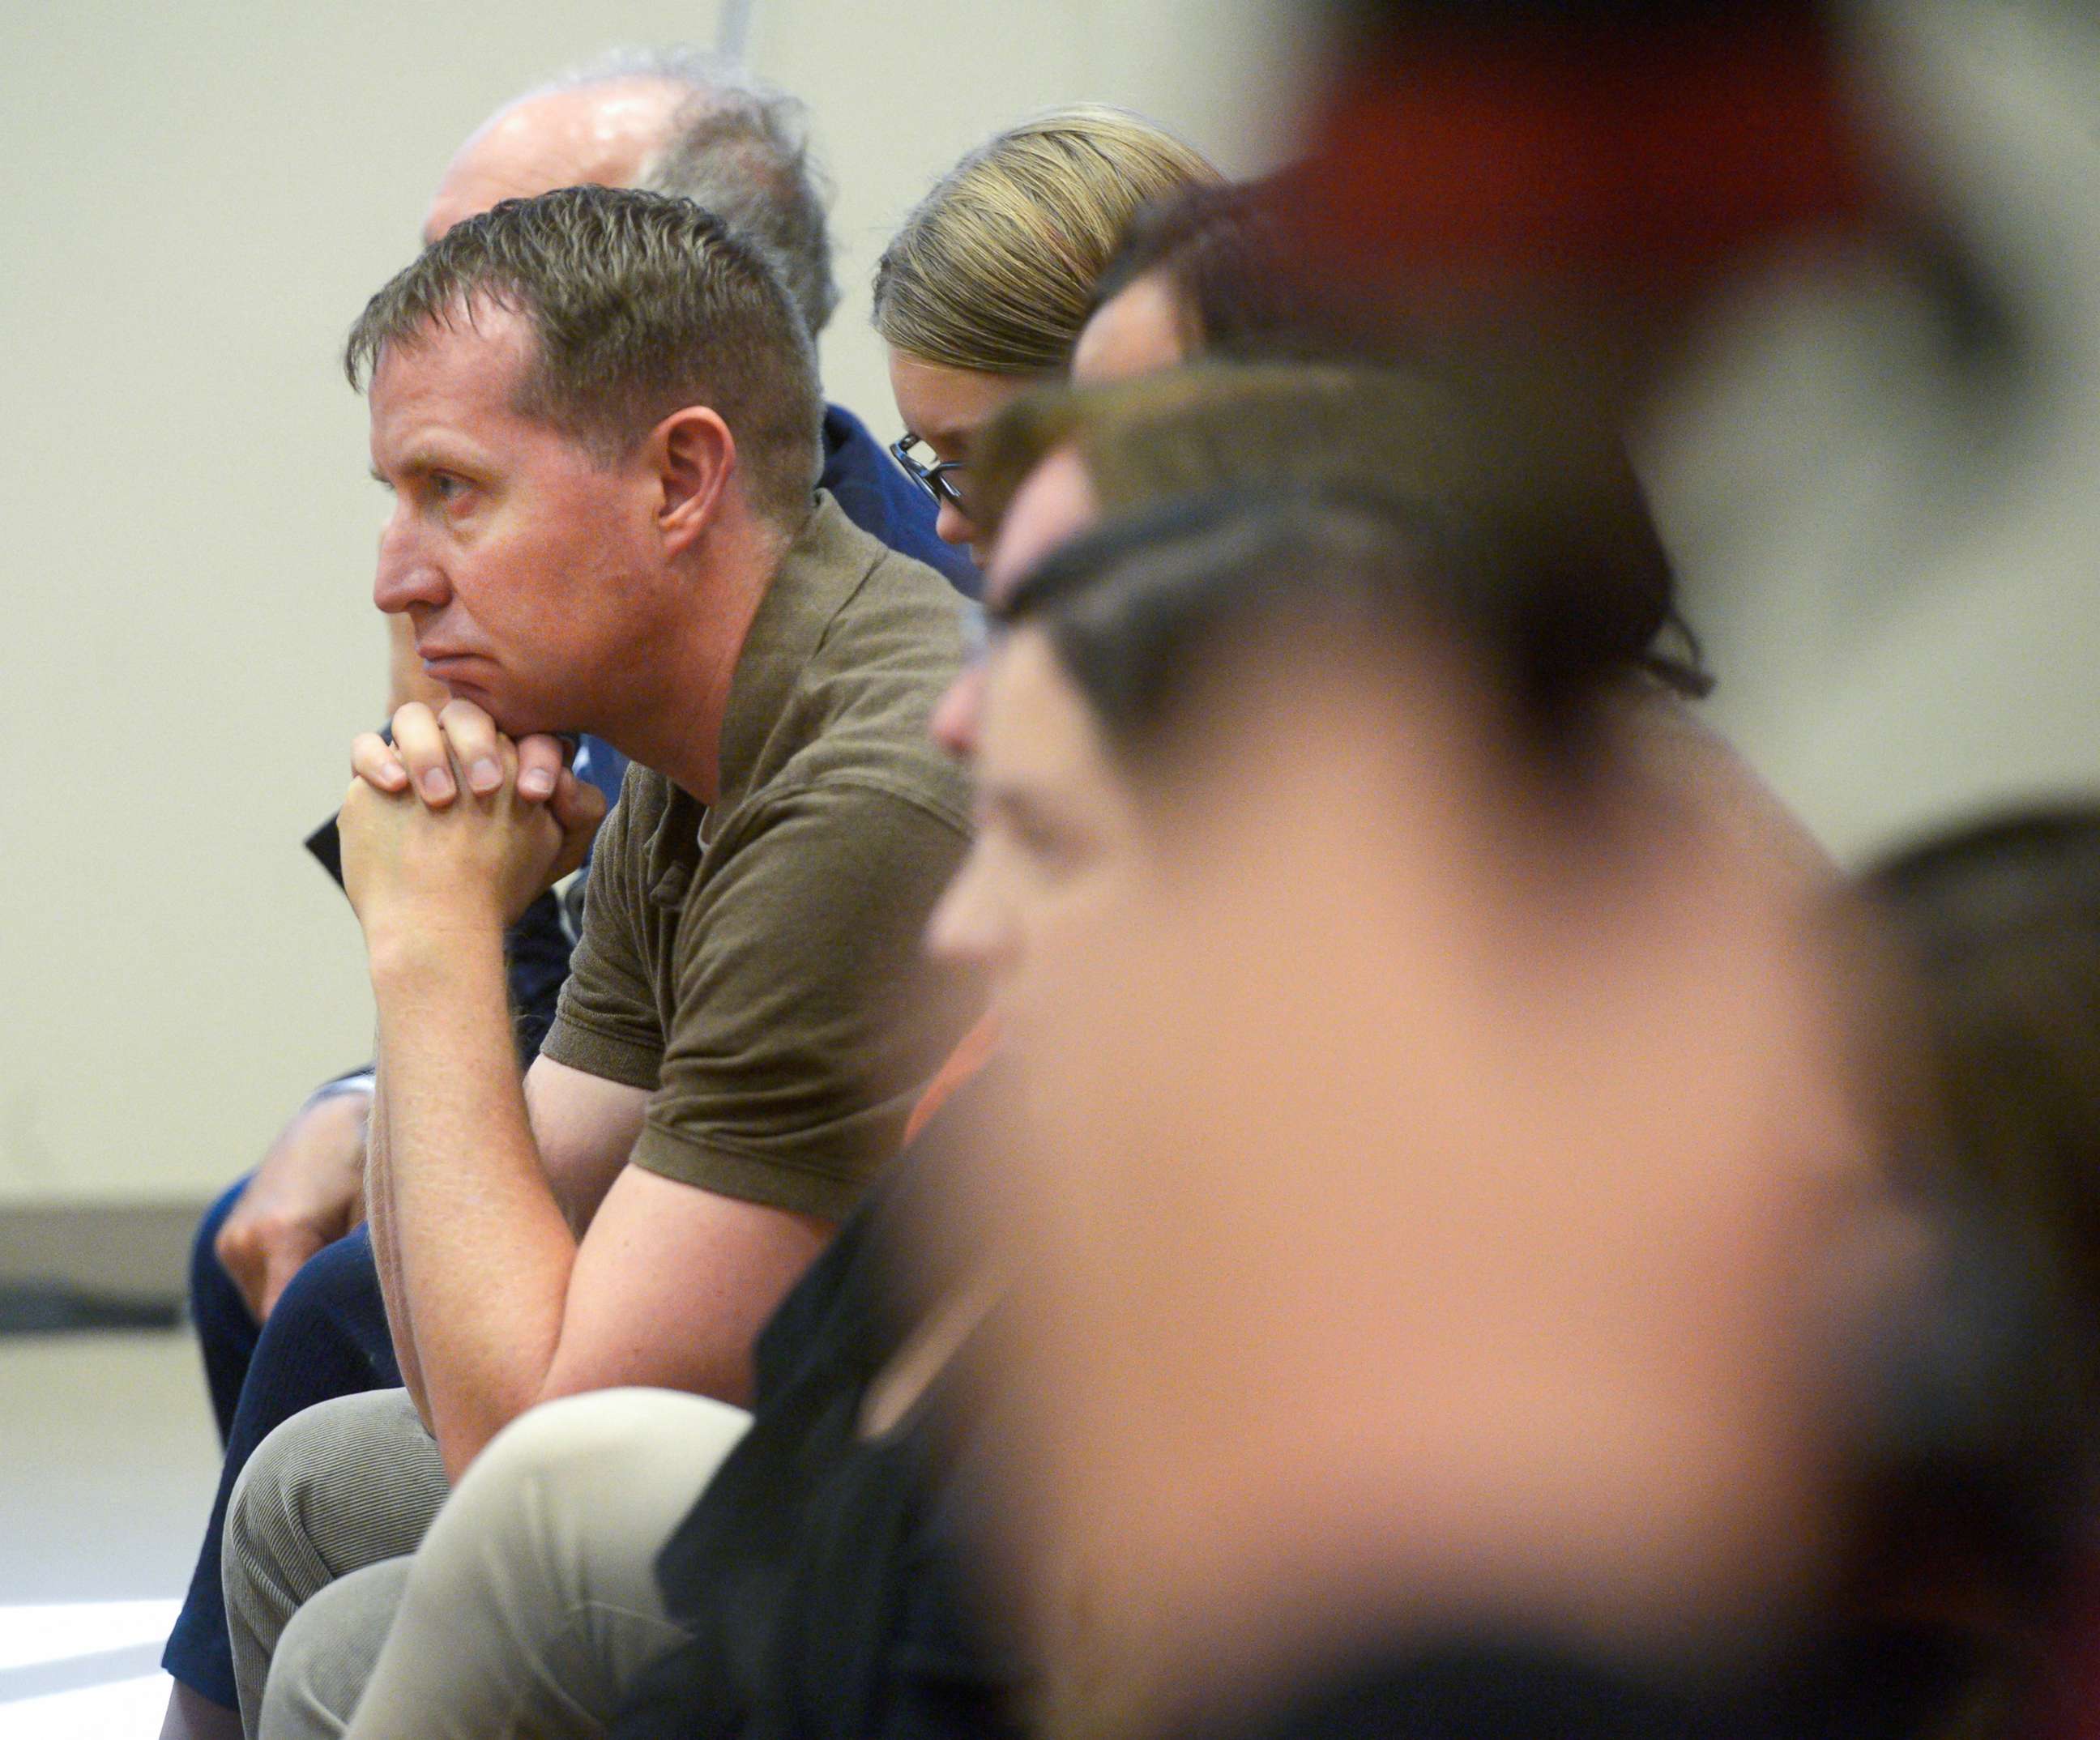 PHOTO: Robbie Parker, parent of Emilie, one of the victims in the Sandy Hook Elementary School shooting, listens during closing statements in the Alex Jones Sandy Hook defamation damages trial in Superior Court in Waterbury, Conn., Oct. 6, 2022.